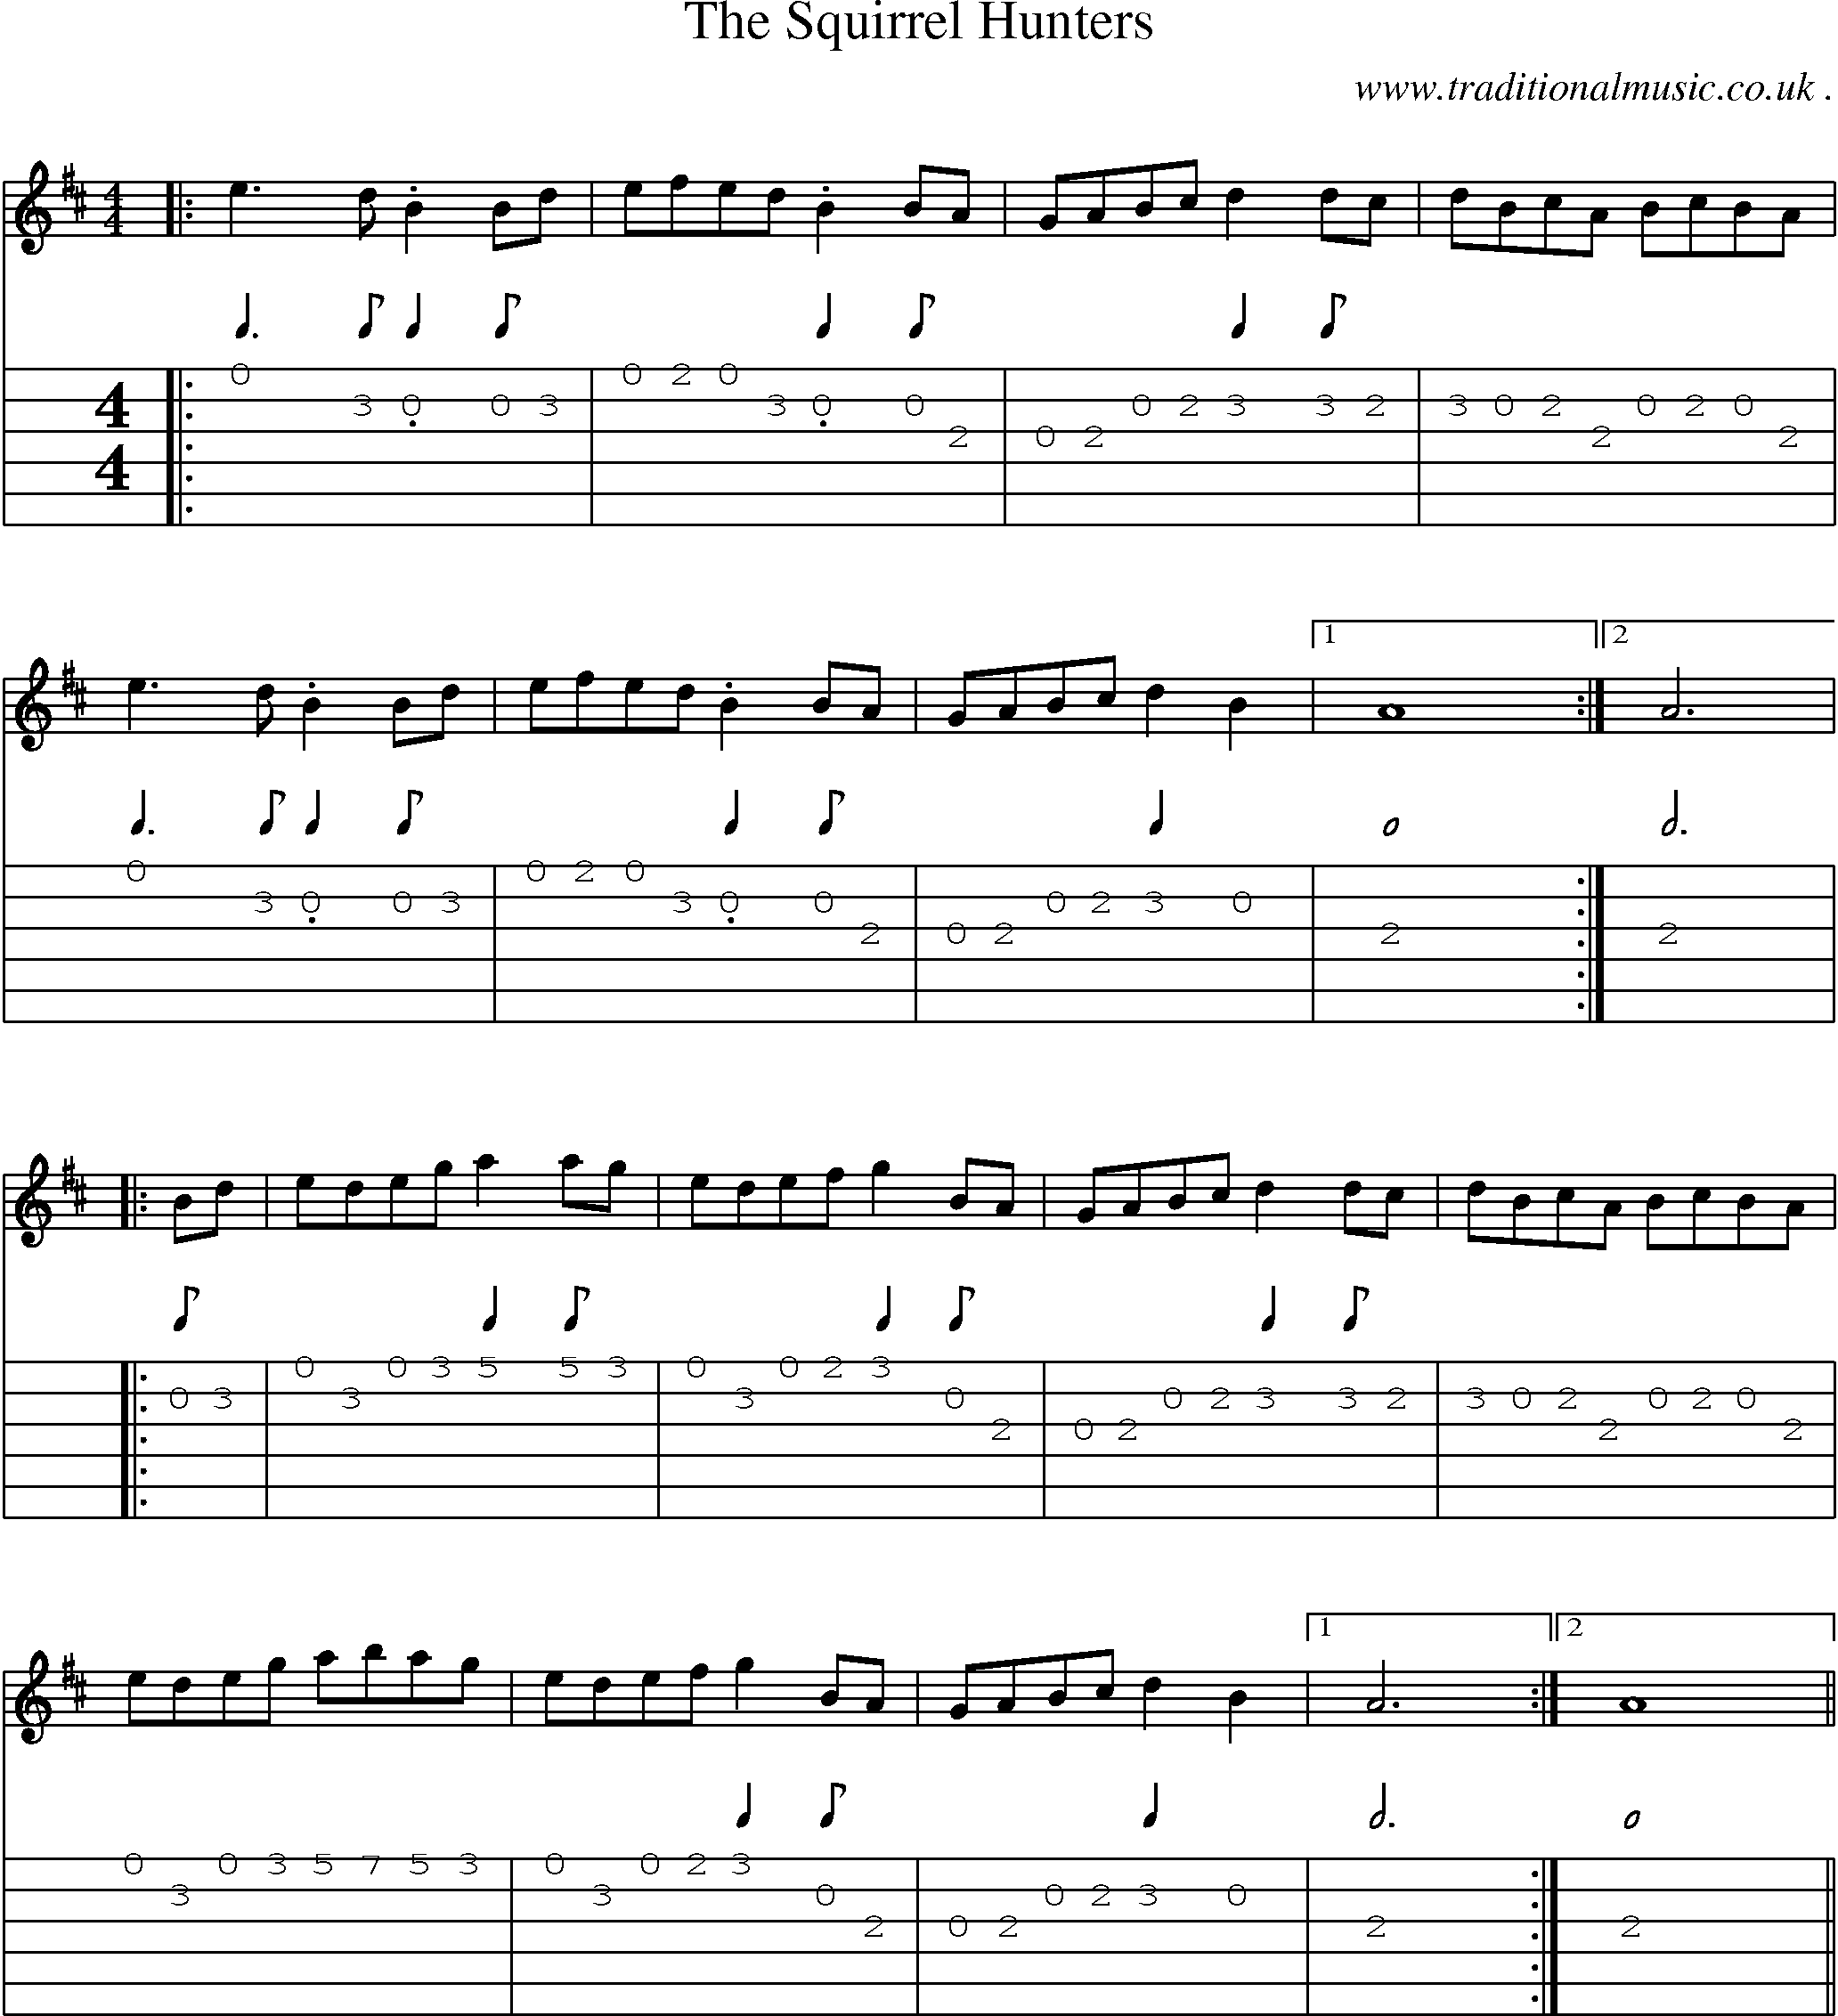 Sheet-Music and Guitar Tabs for The Squirrel Hunters